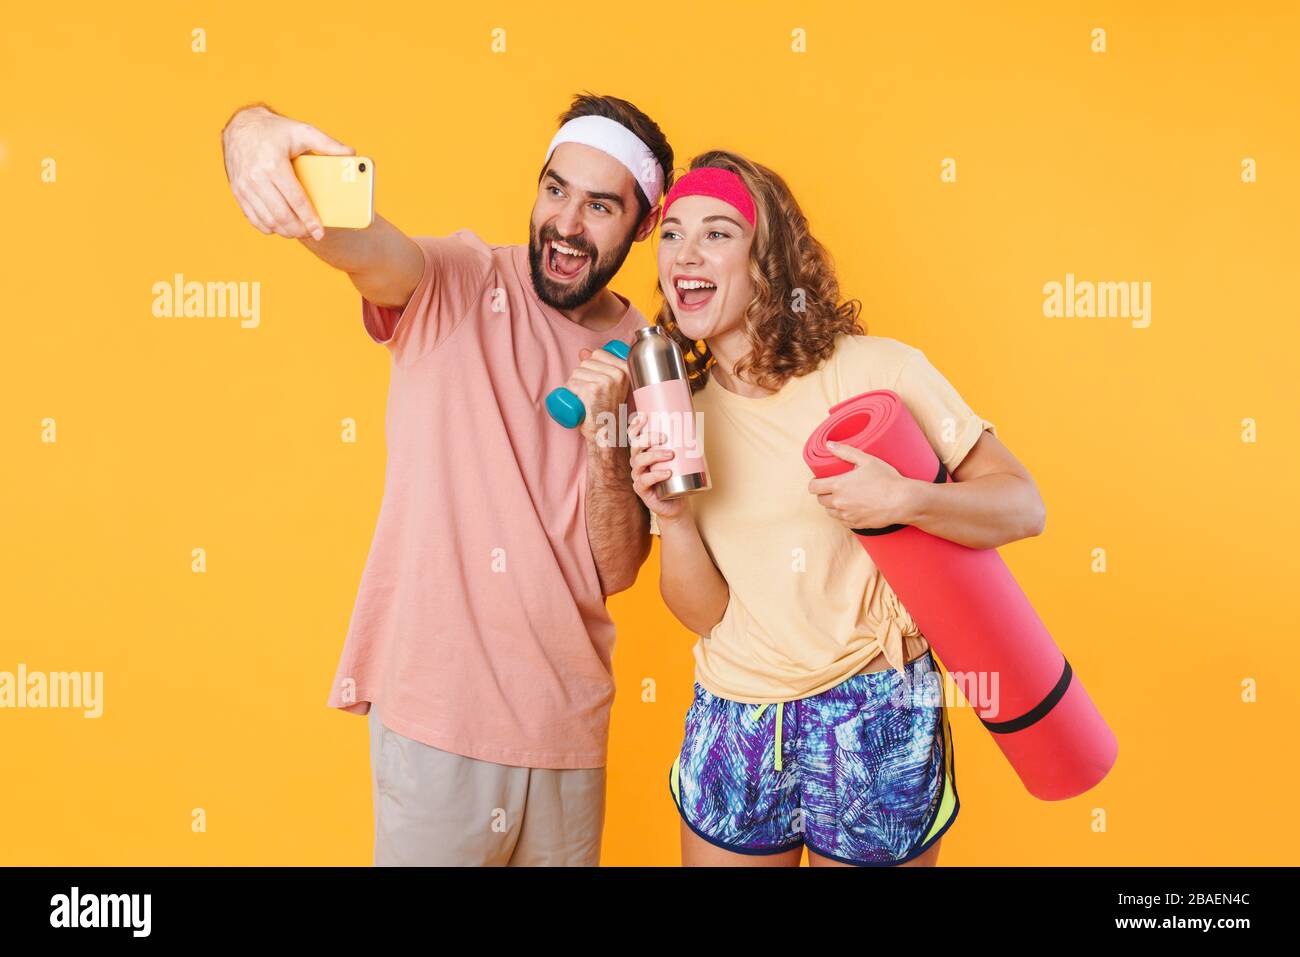 Portrait of athletic young happy couple taking selfie photo with dumbbells and fitness mat isolated over yellow background Stock Photo